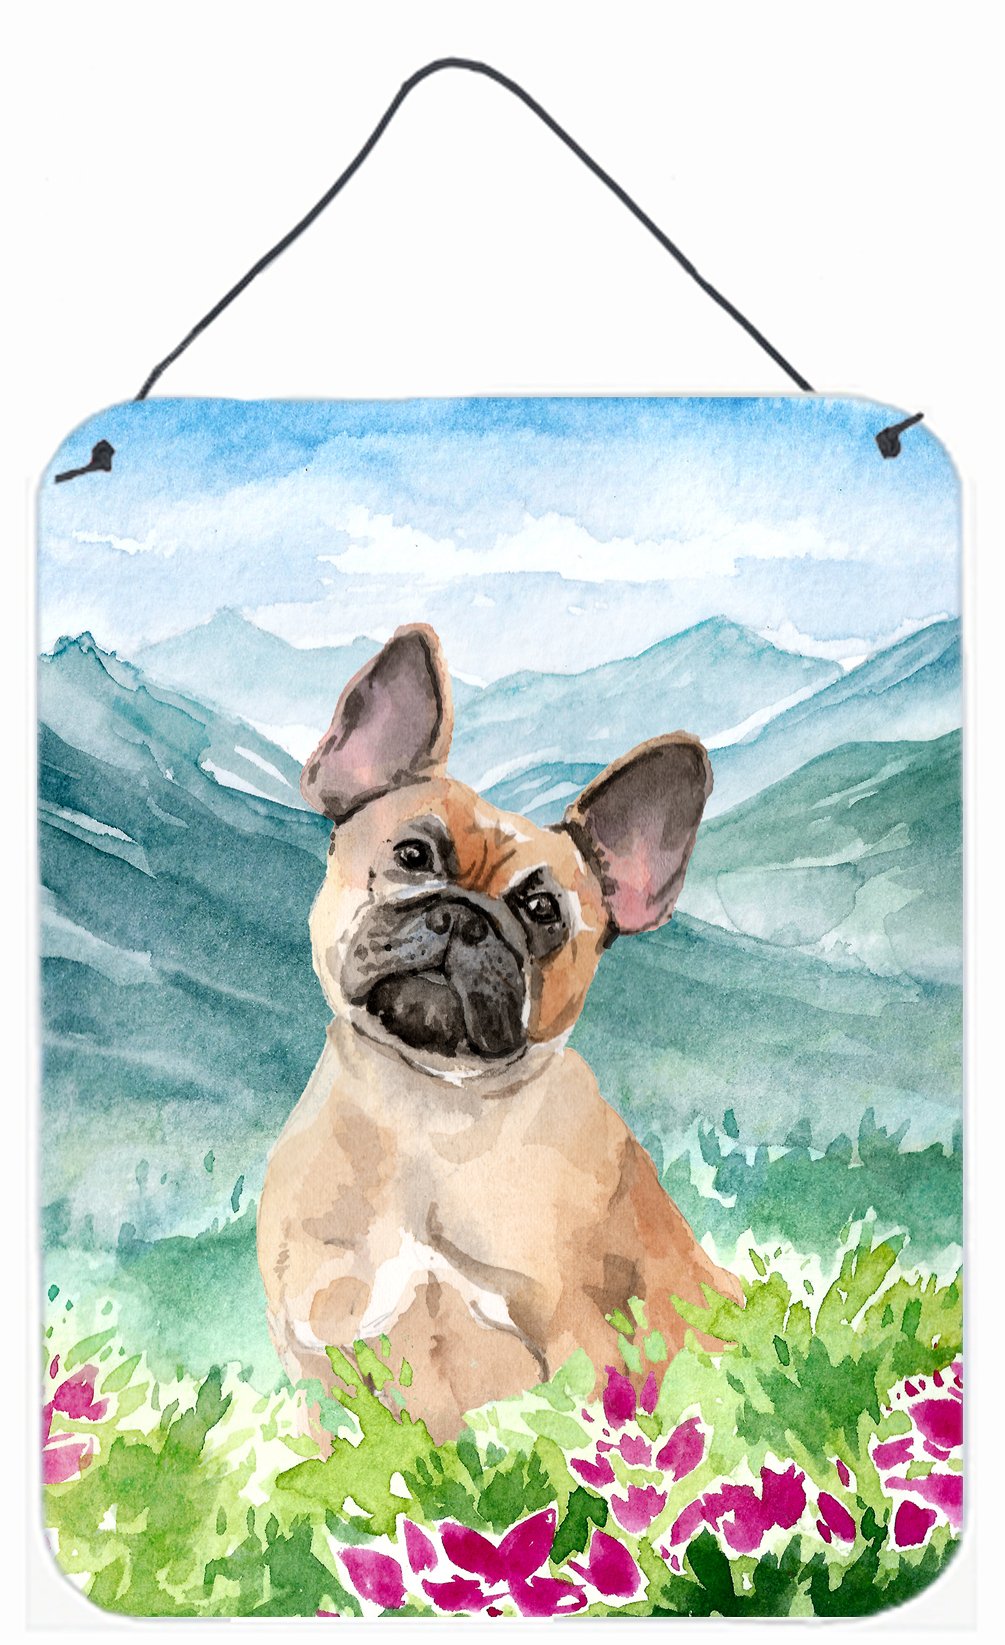 Mountian Flowers Fawn French Bulldog Wall or Door Hanging Prints CK1978DS1216 by Caroline's Treasures